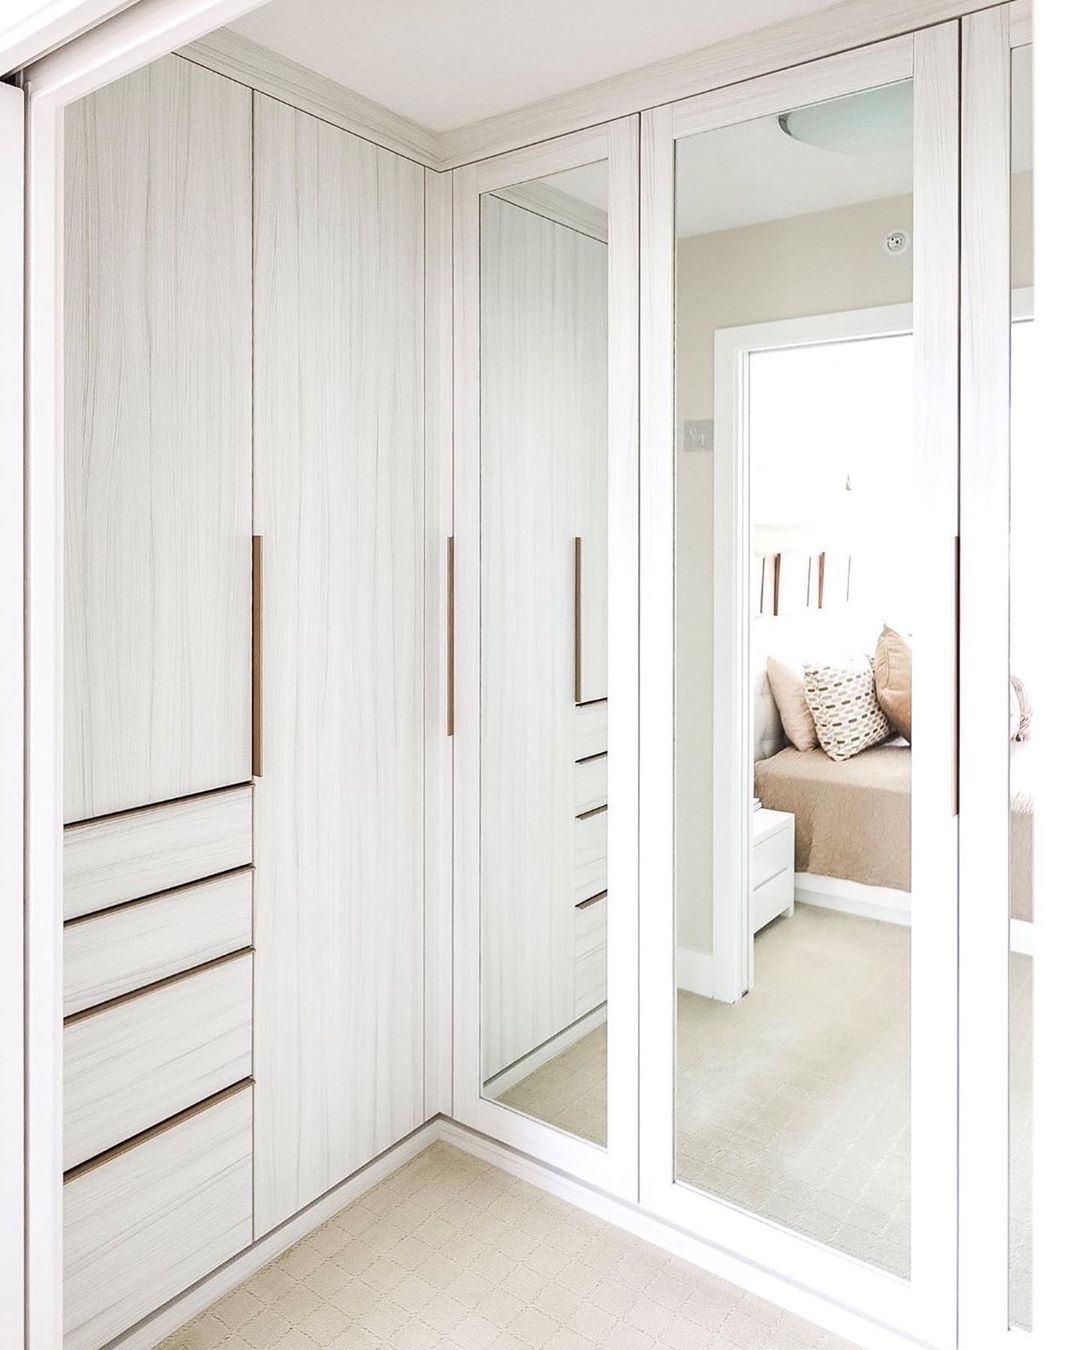 Walk-in closet with floor to ceiling mirrors. Photo by Instagram user @steph.pollard.design